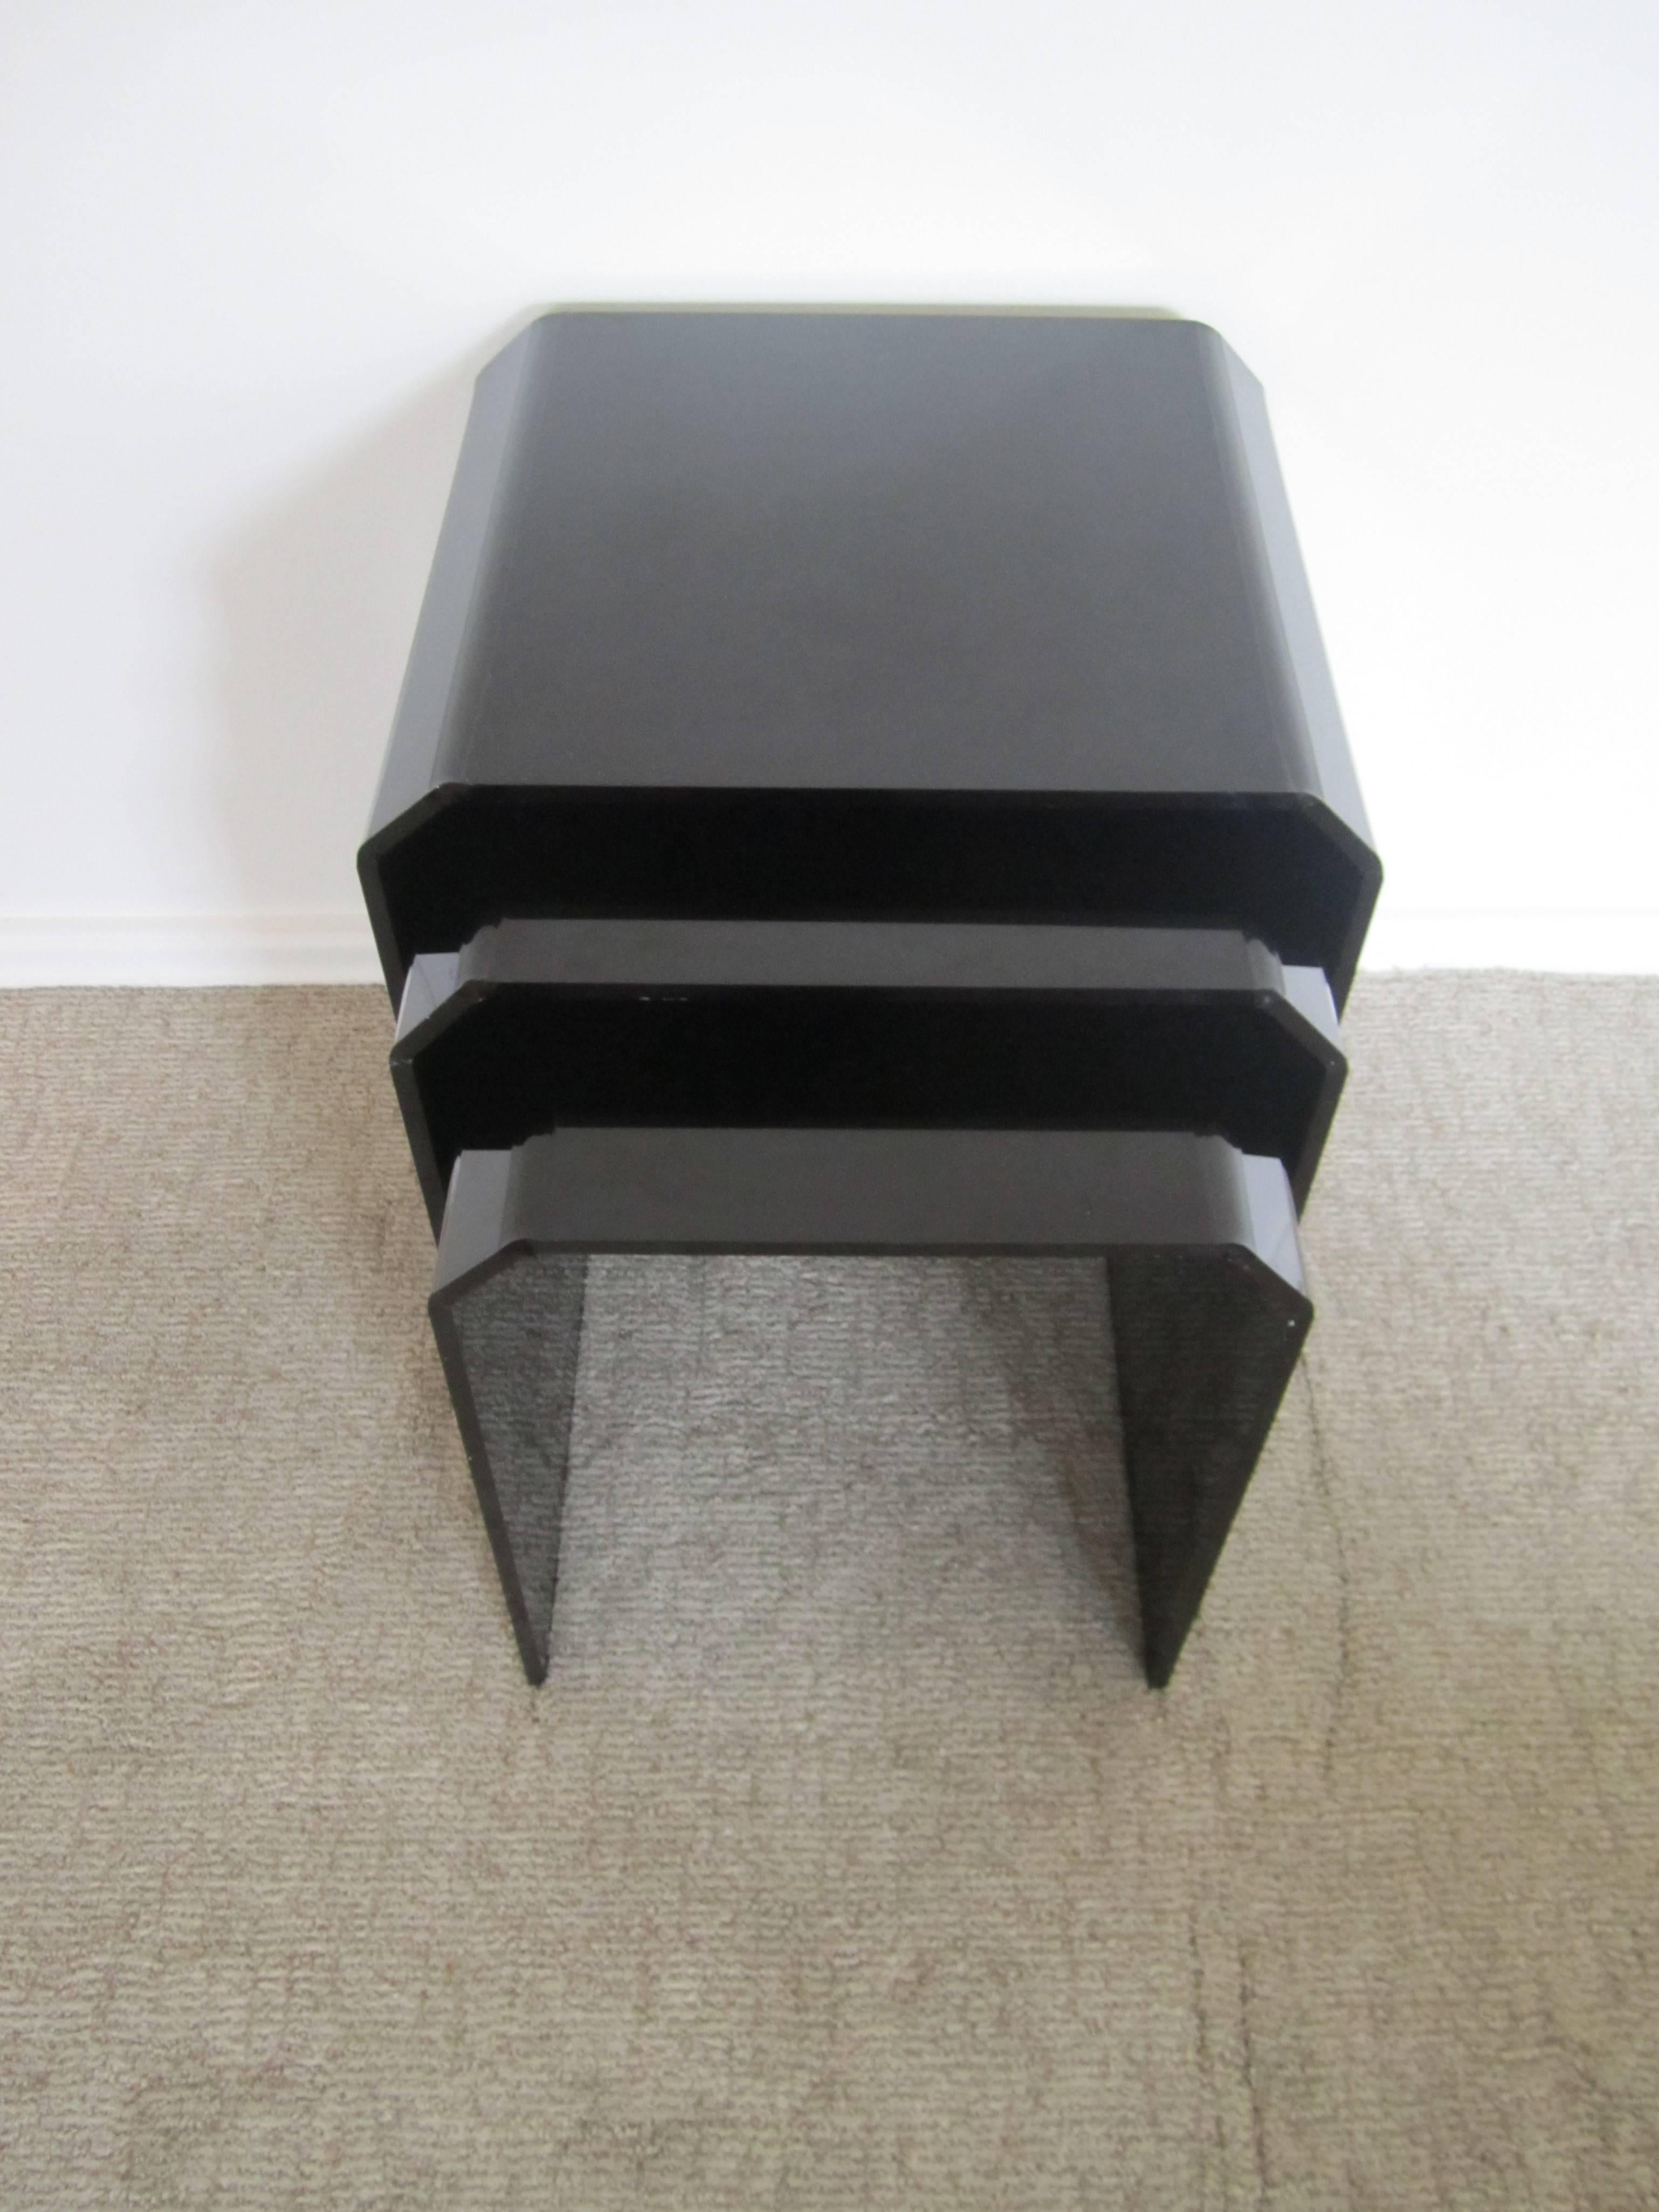 A trio (three) of Modern black acrylic nesting, end, or side tables with tapered corners. 

Measurements include: 
16.75 H x 13.5 W x 14 D
18.75 H x 15 W x 14& D
20 H x 15.25 W x 14 D

Set of three available here online. By request, set can be made